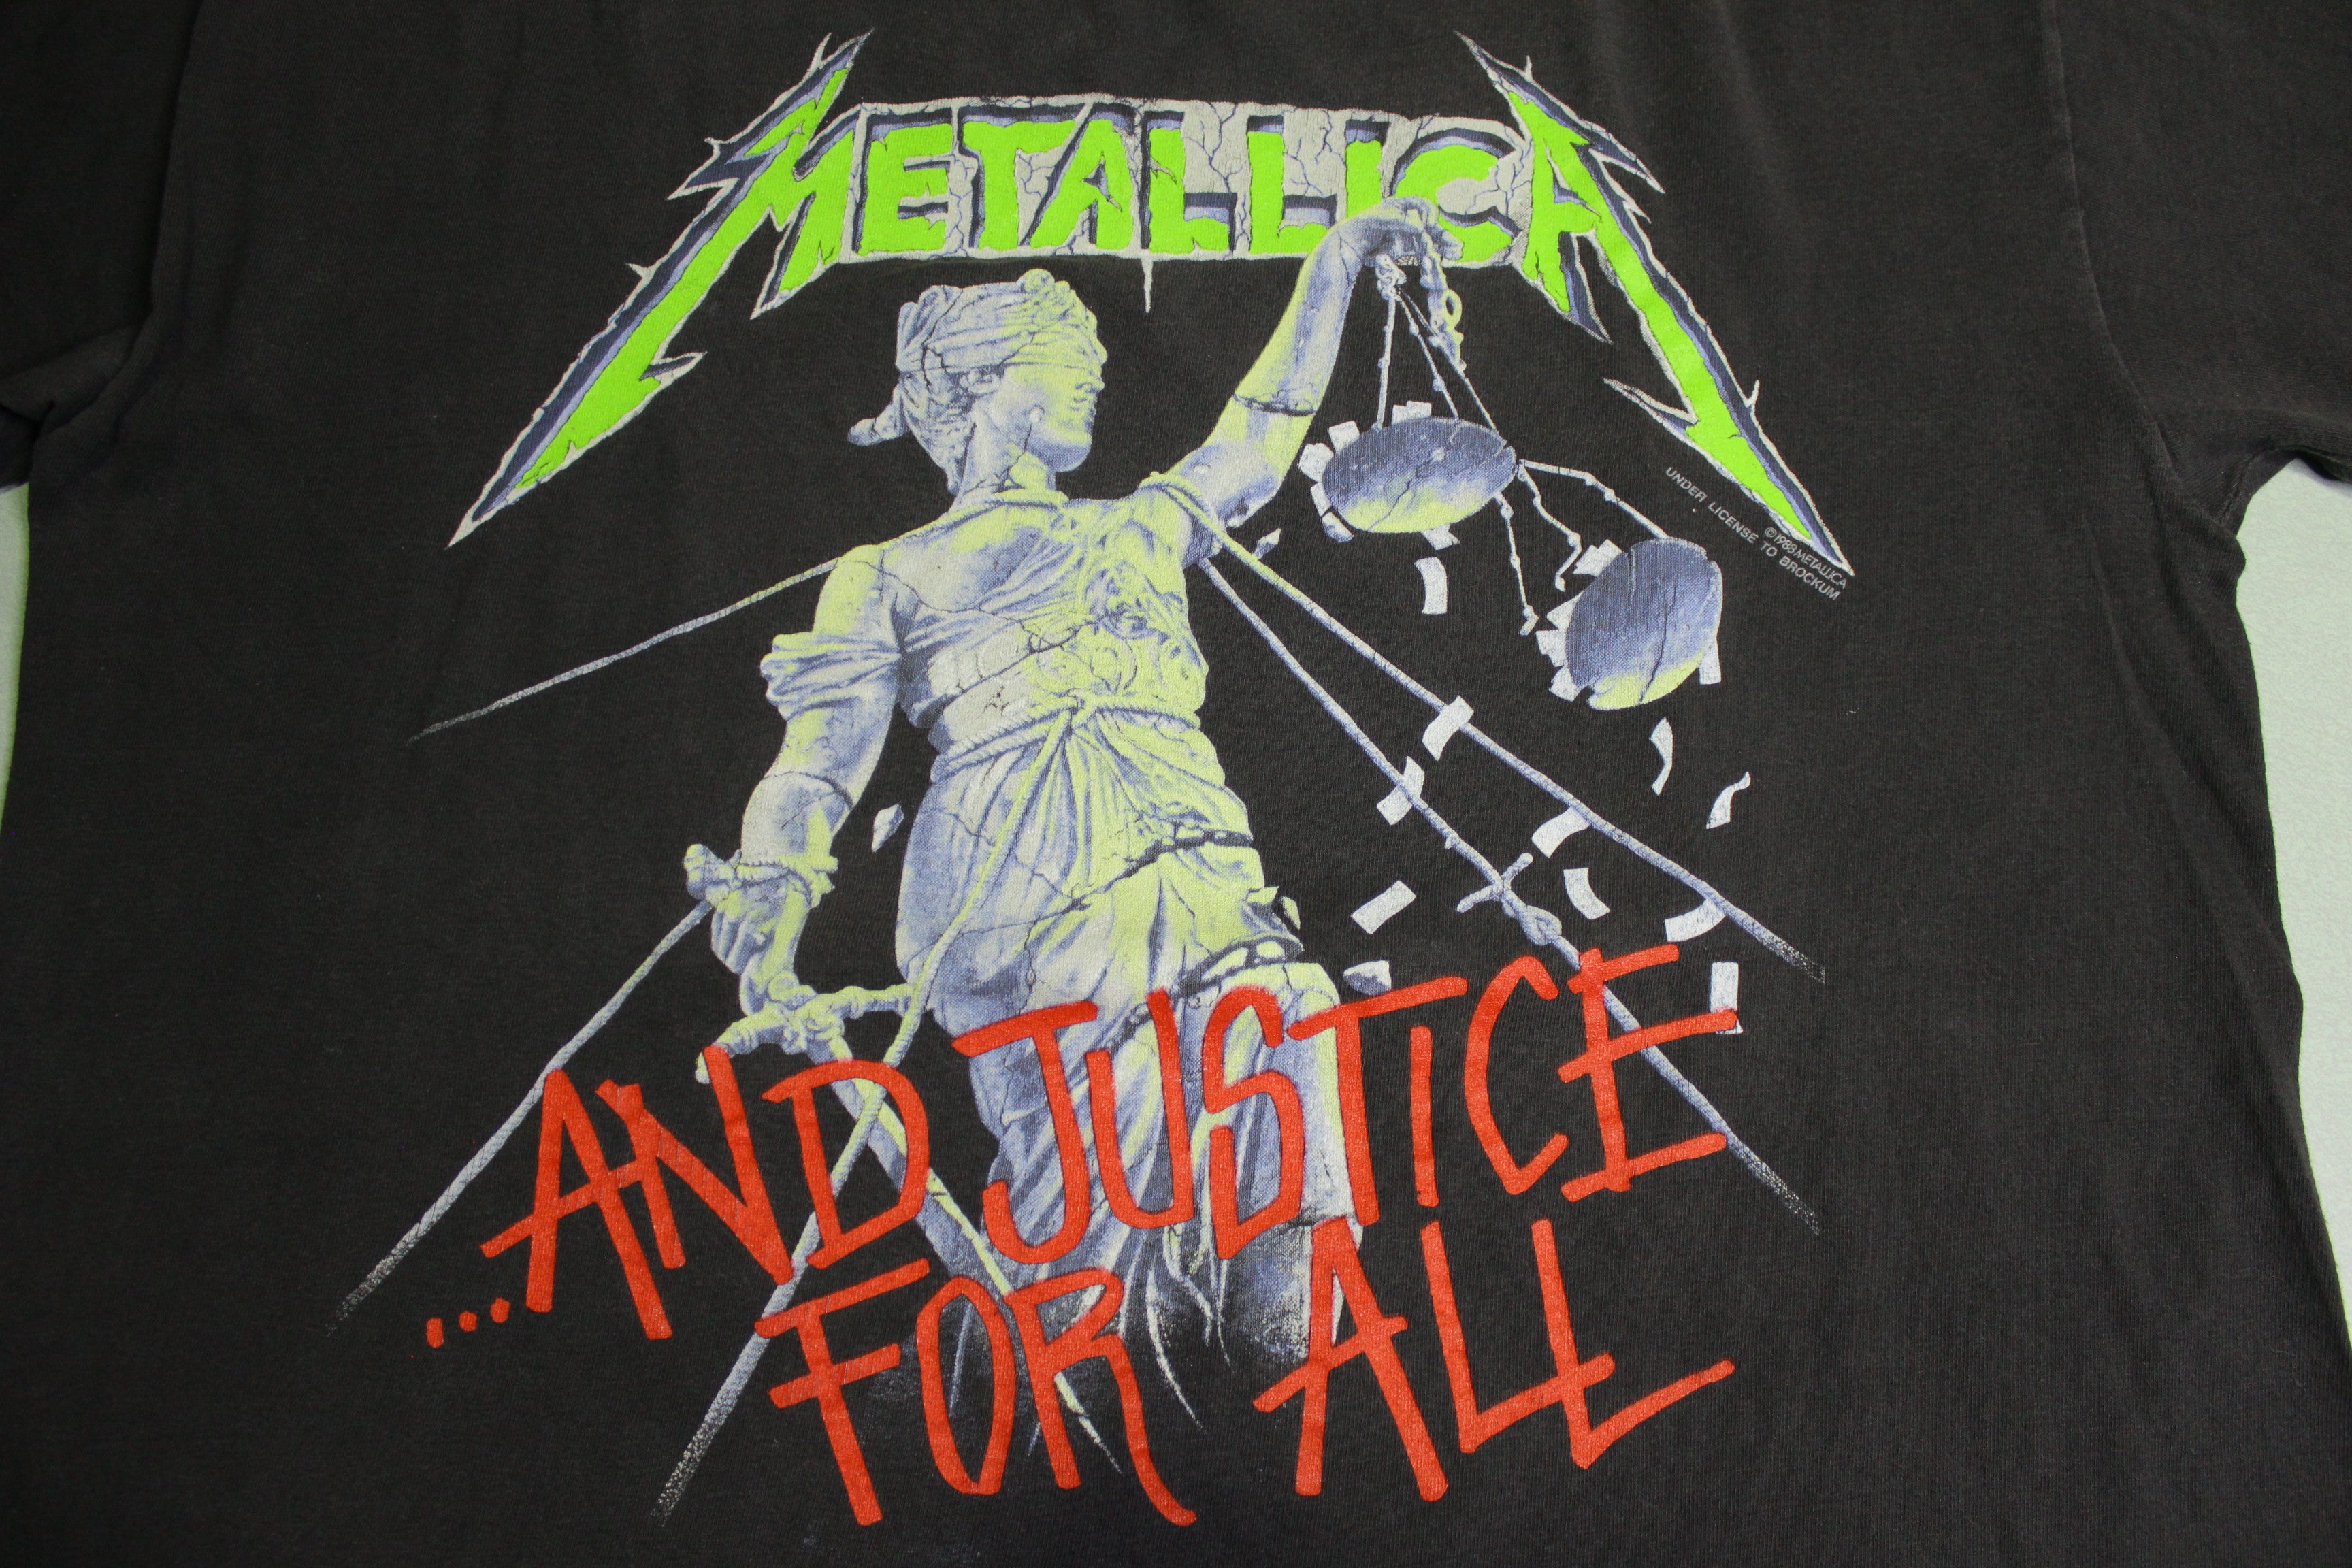 Metallica Justice For All 1988 Hammer Heads Crush You Vintage 80's ...